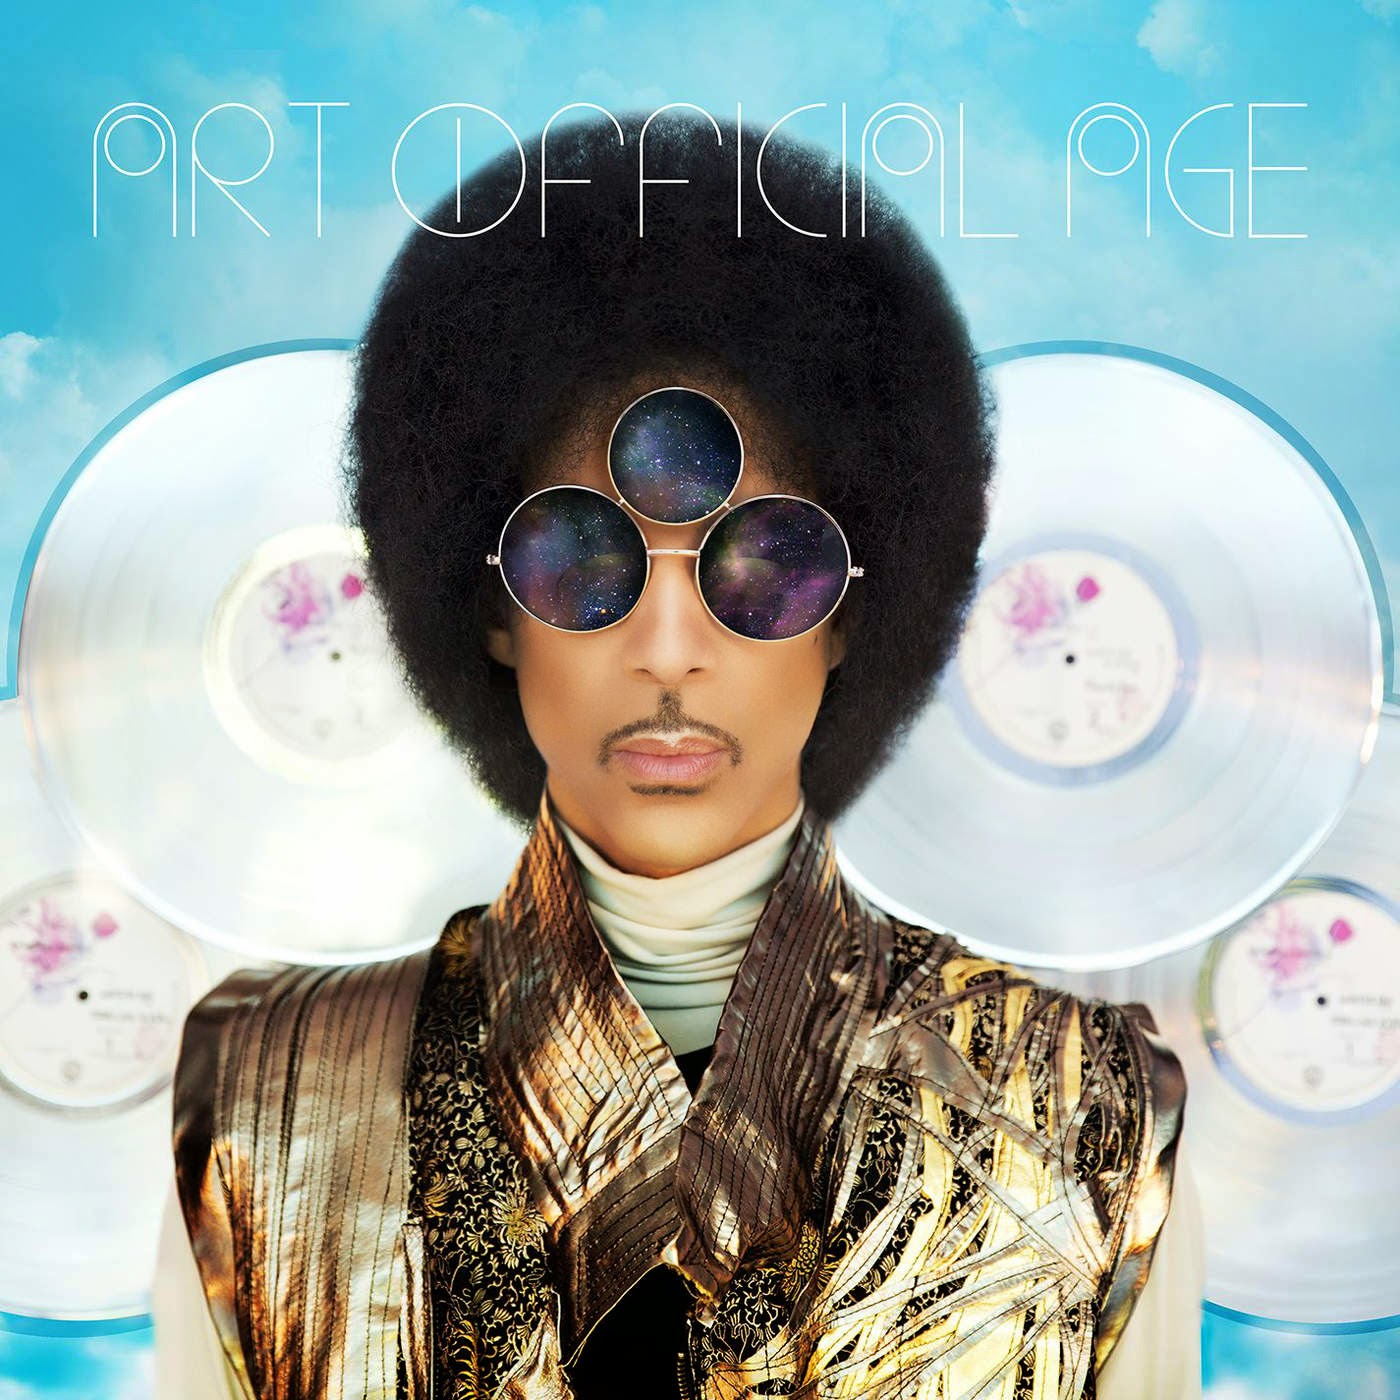 prince-art-official-age.jpg